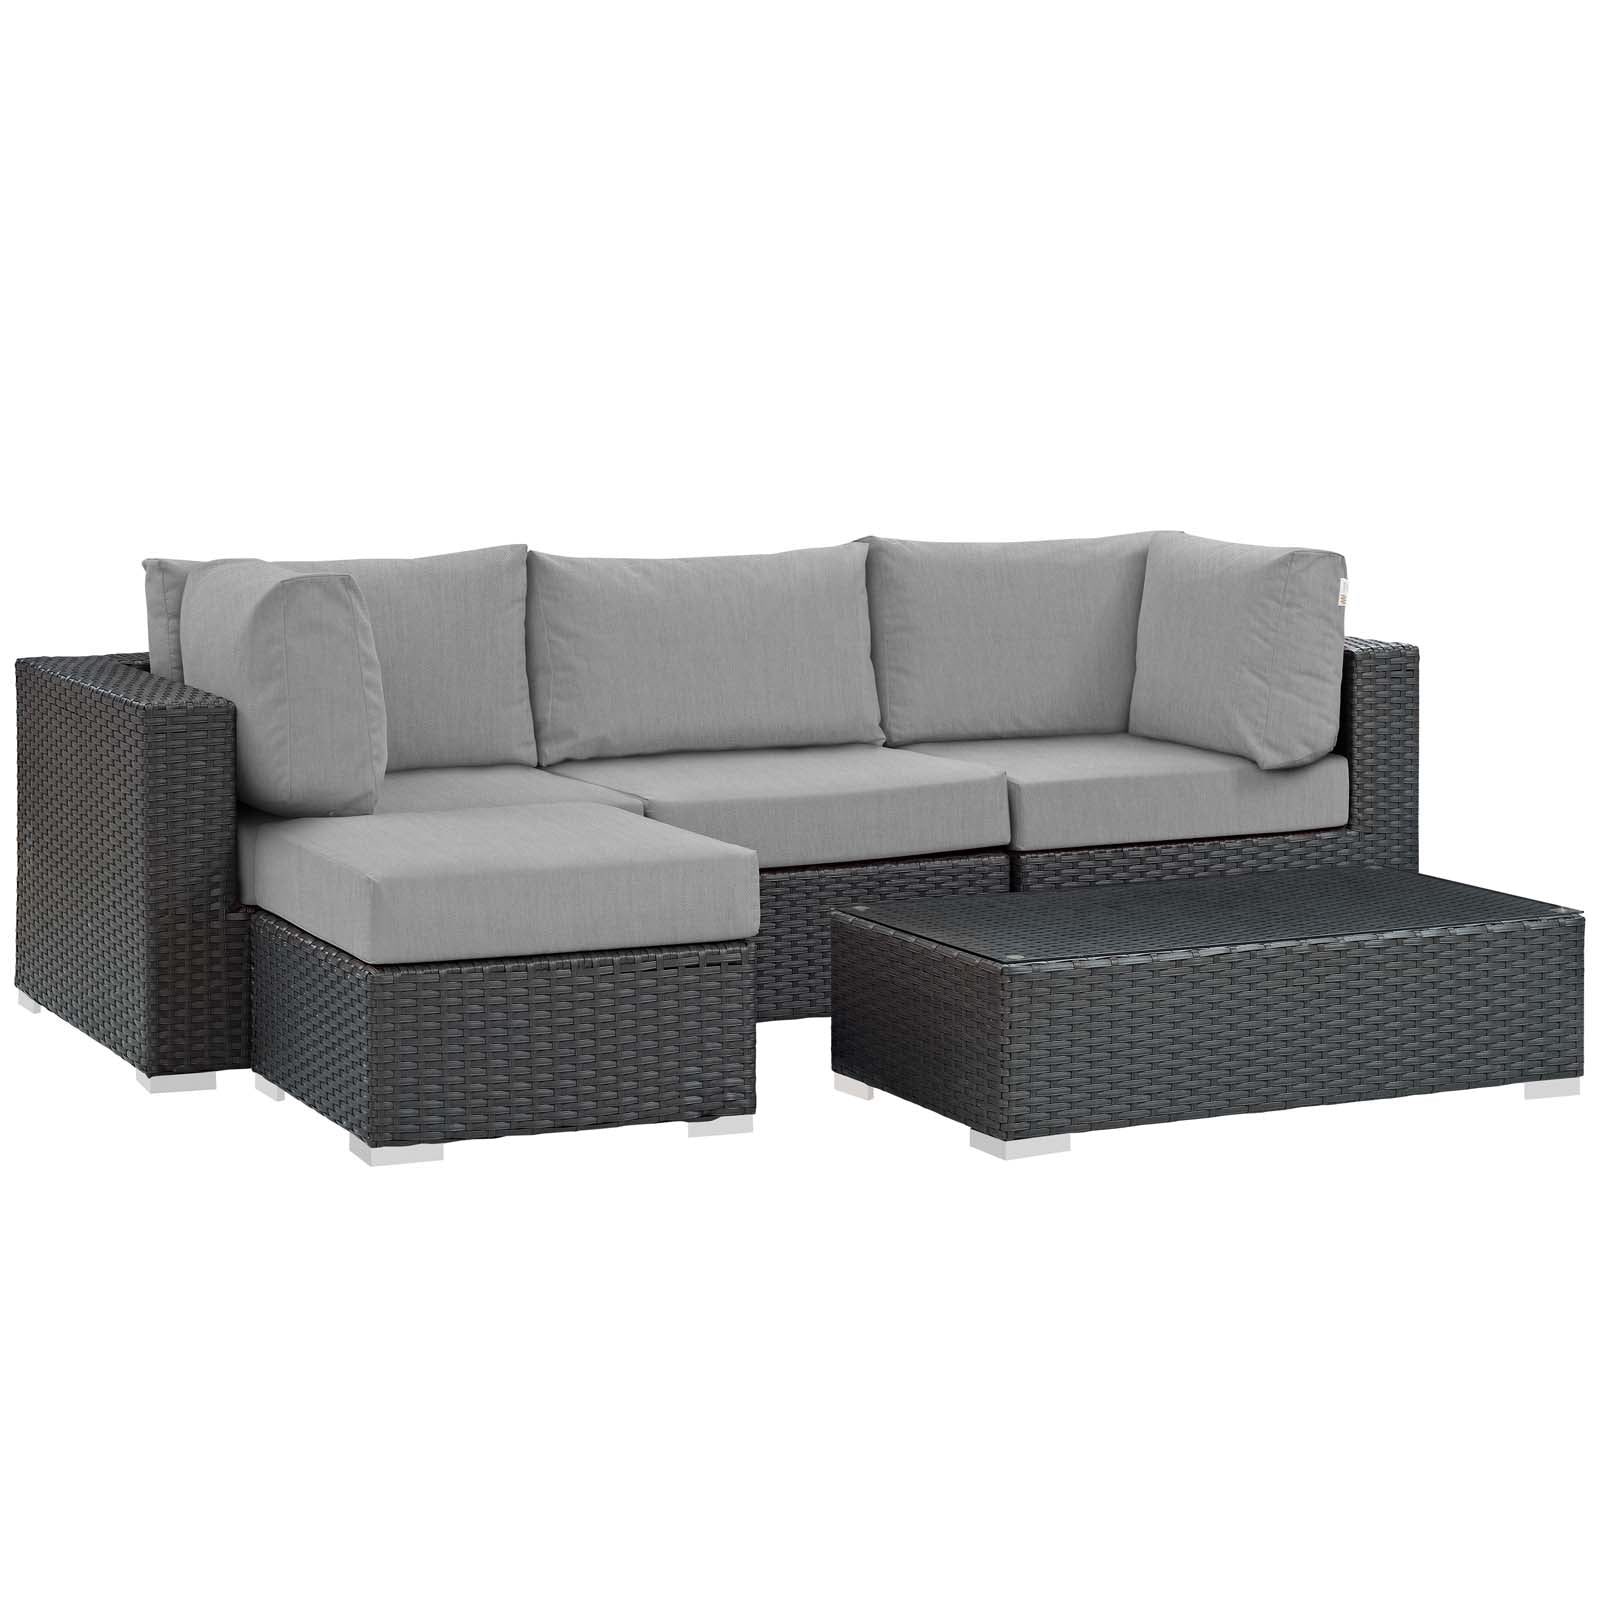 Modway Outdoor Conversation Sets - Sojourn 5 Piece Outdoor Patio Sectional Set Gray